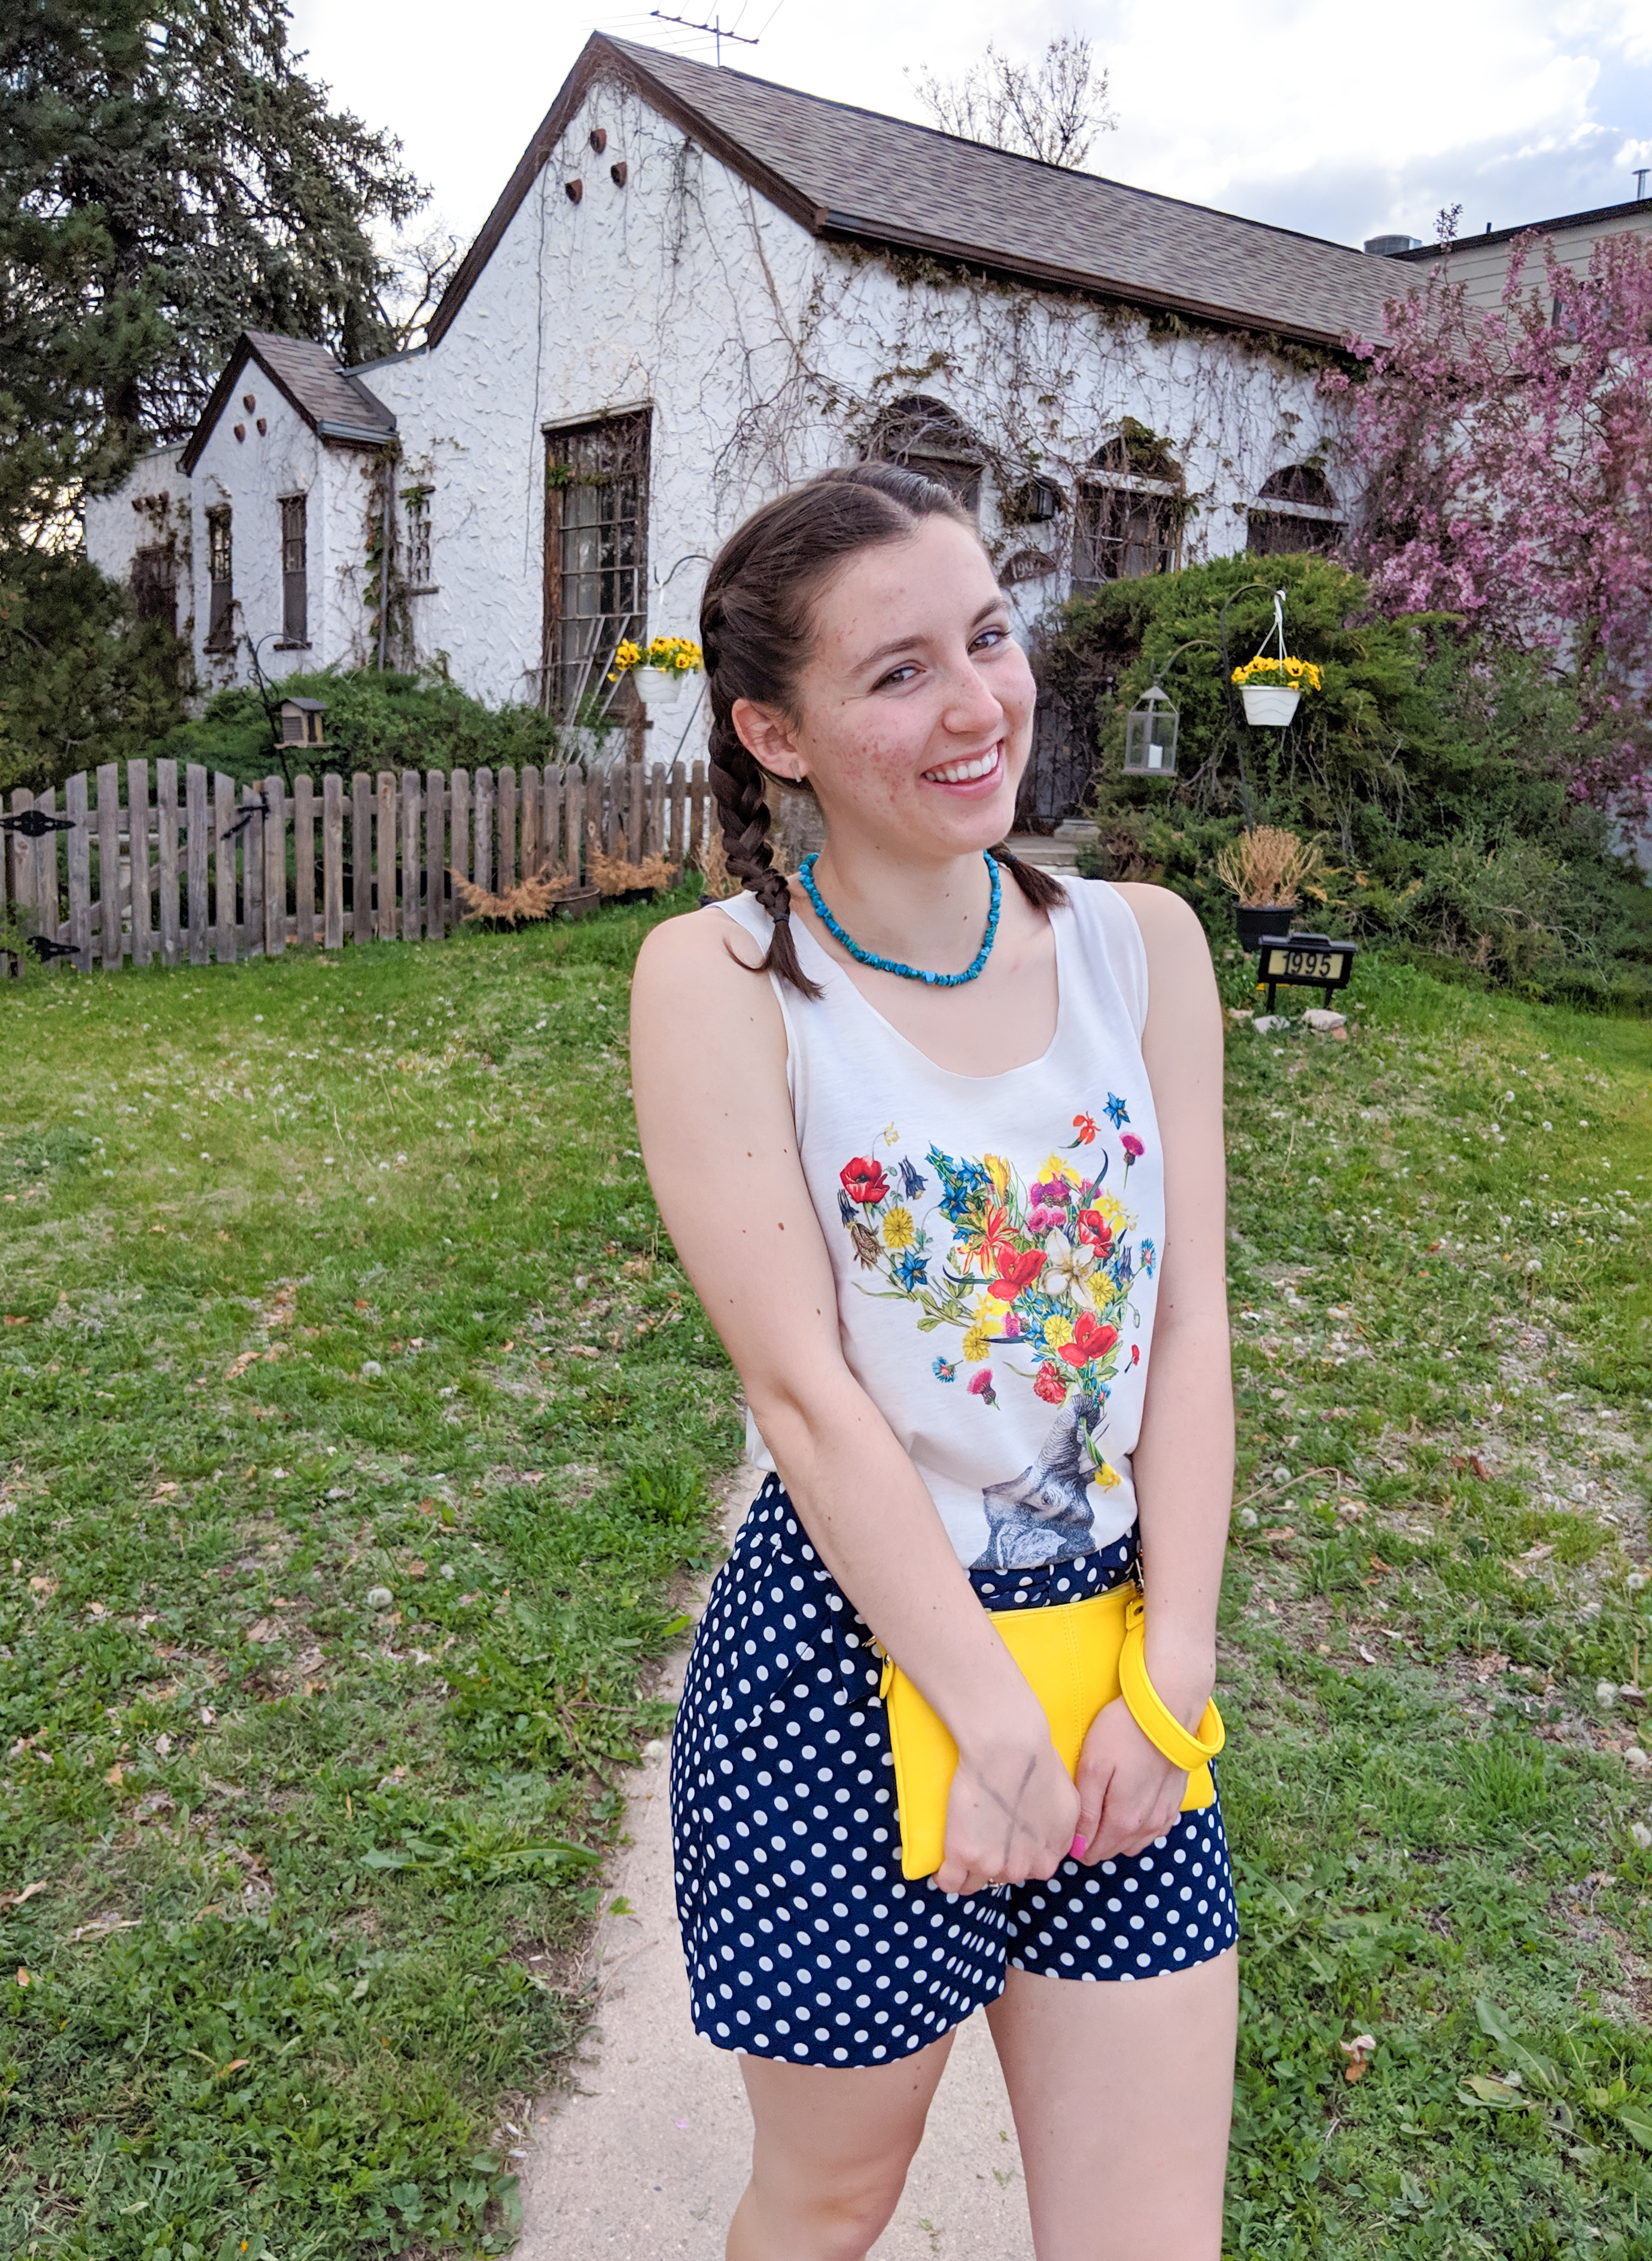 floral graphic tank top, yellow clutch, polka dot shorts, French braids